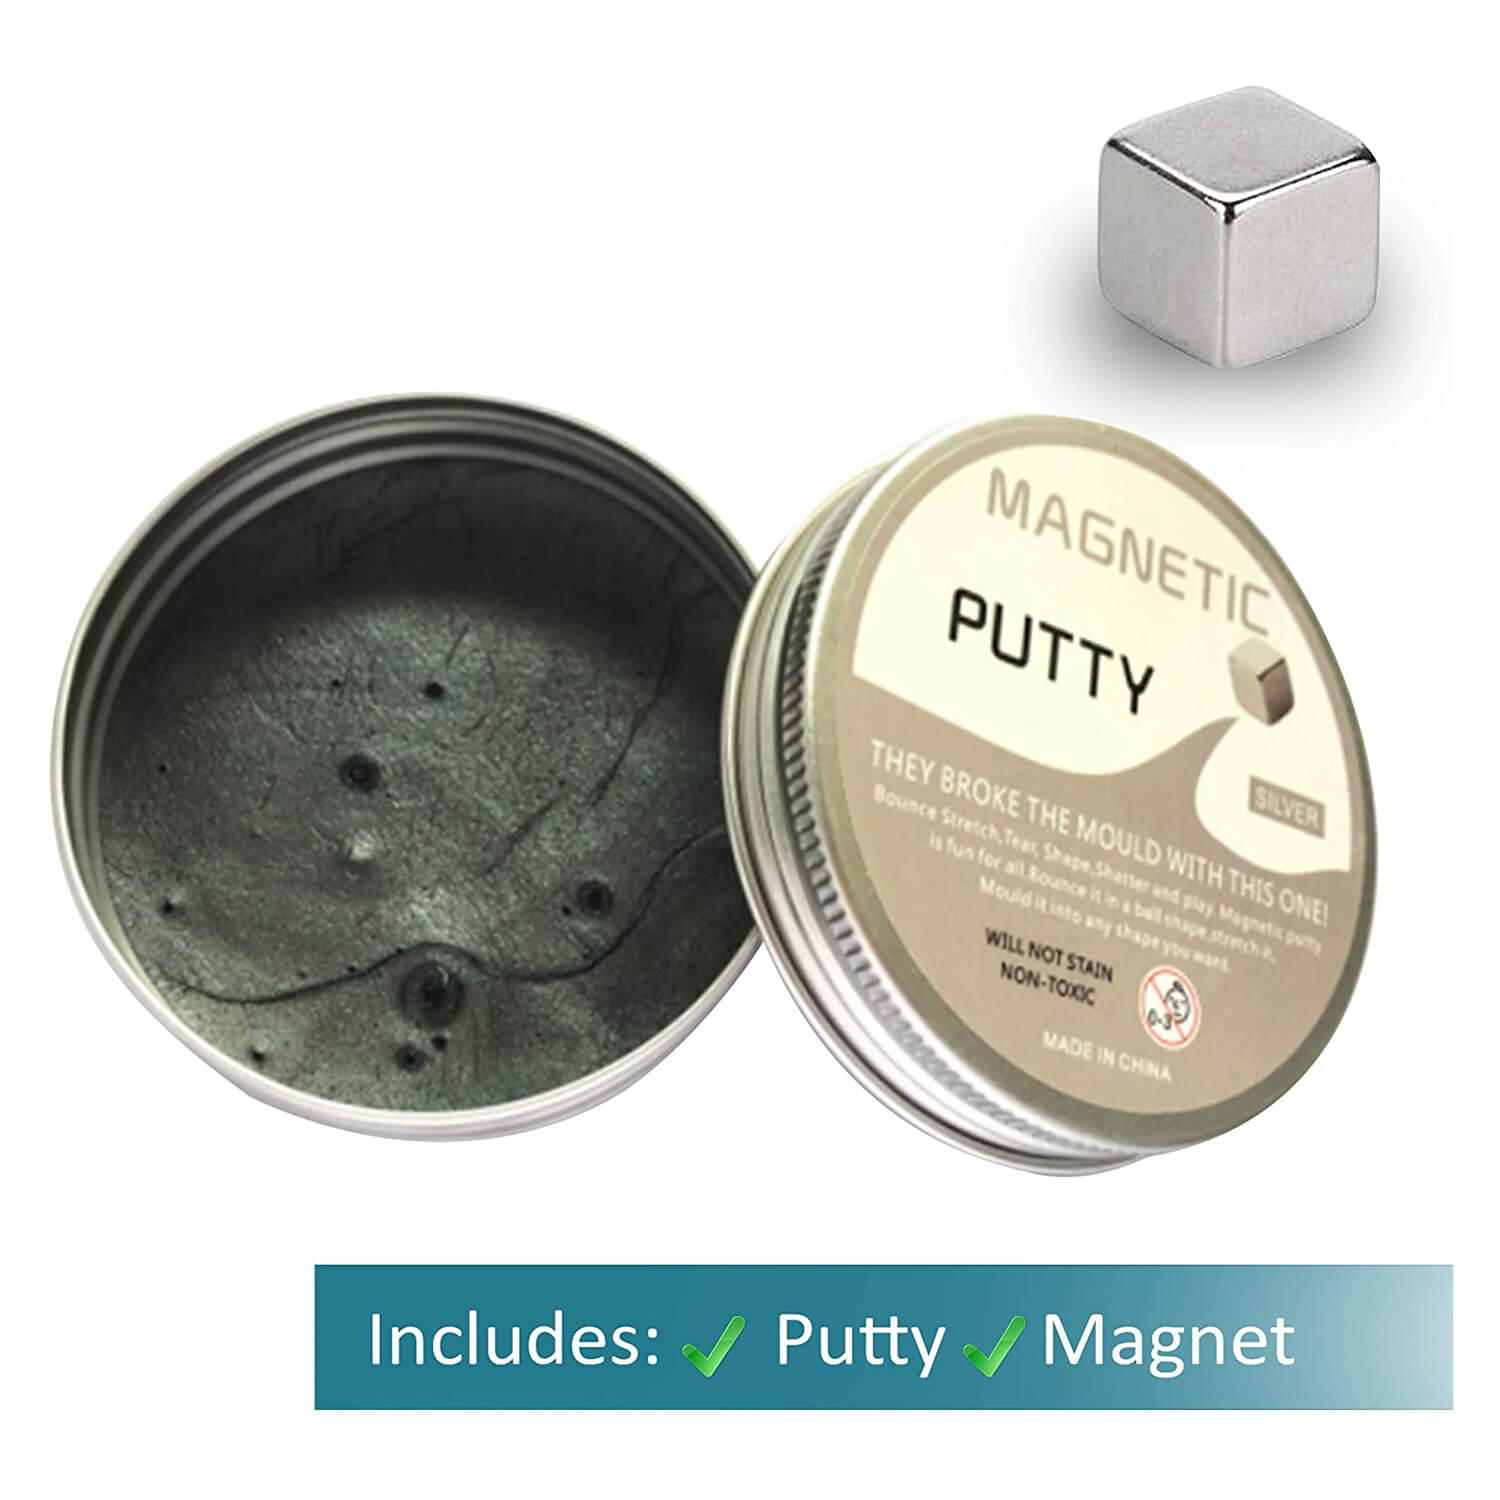 Open container view of the Magnetic Putty packaging.